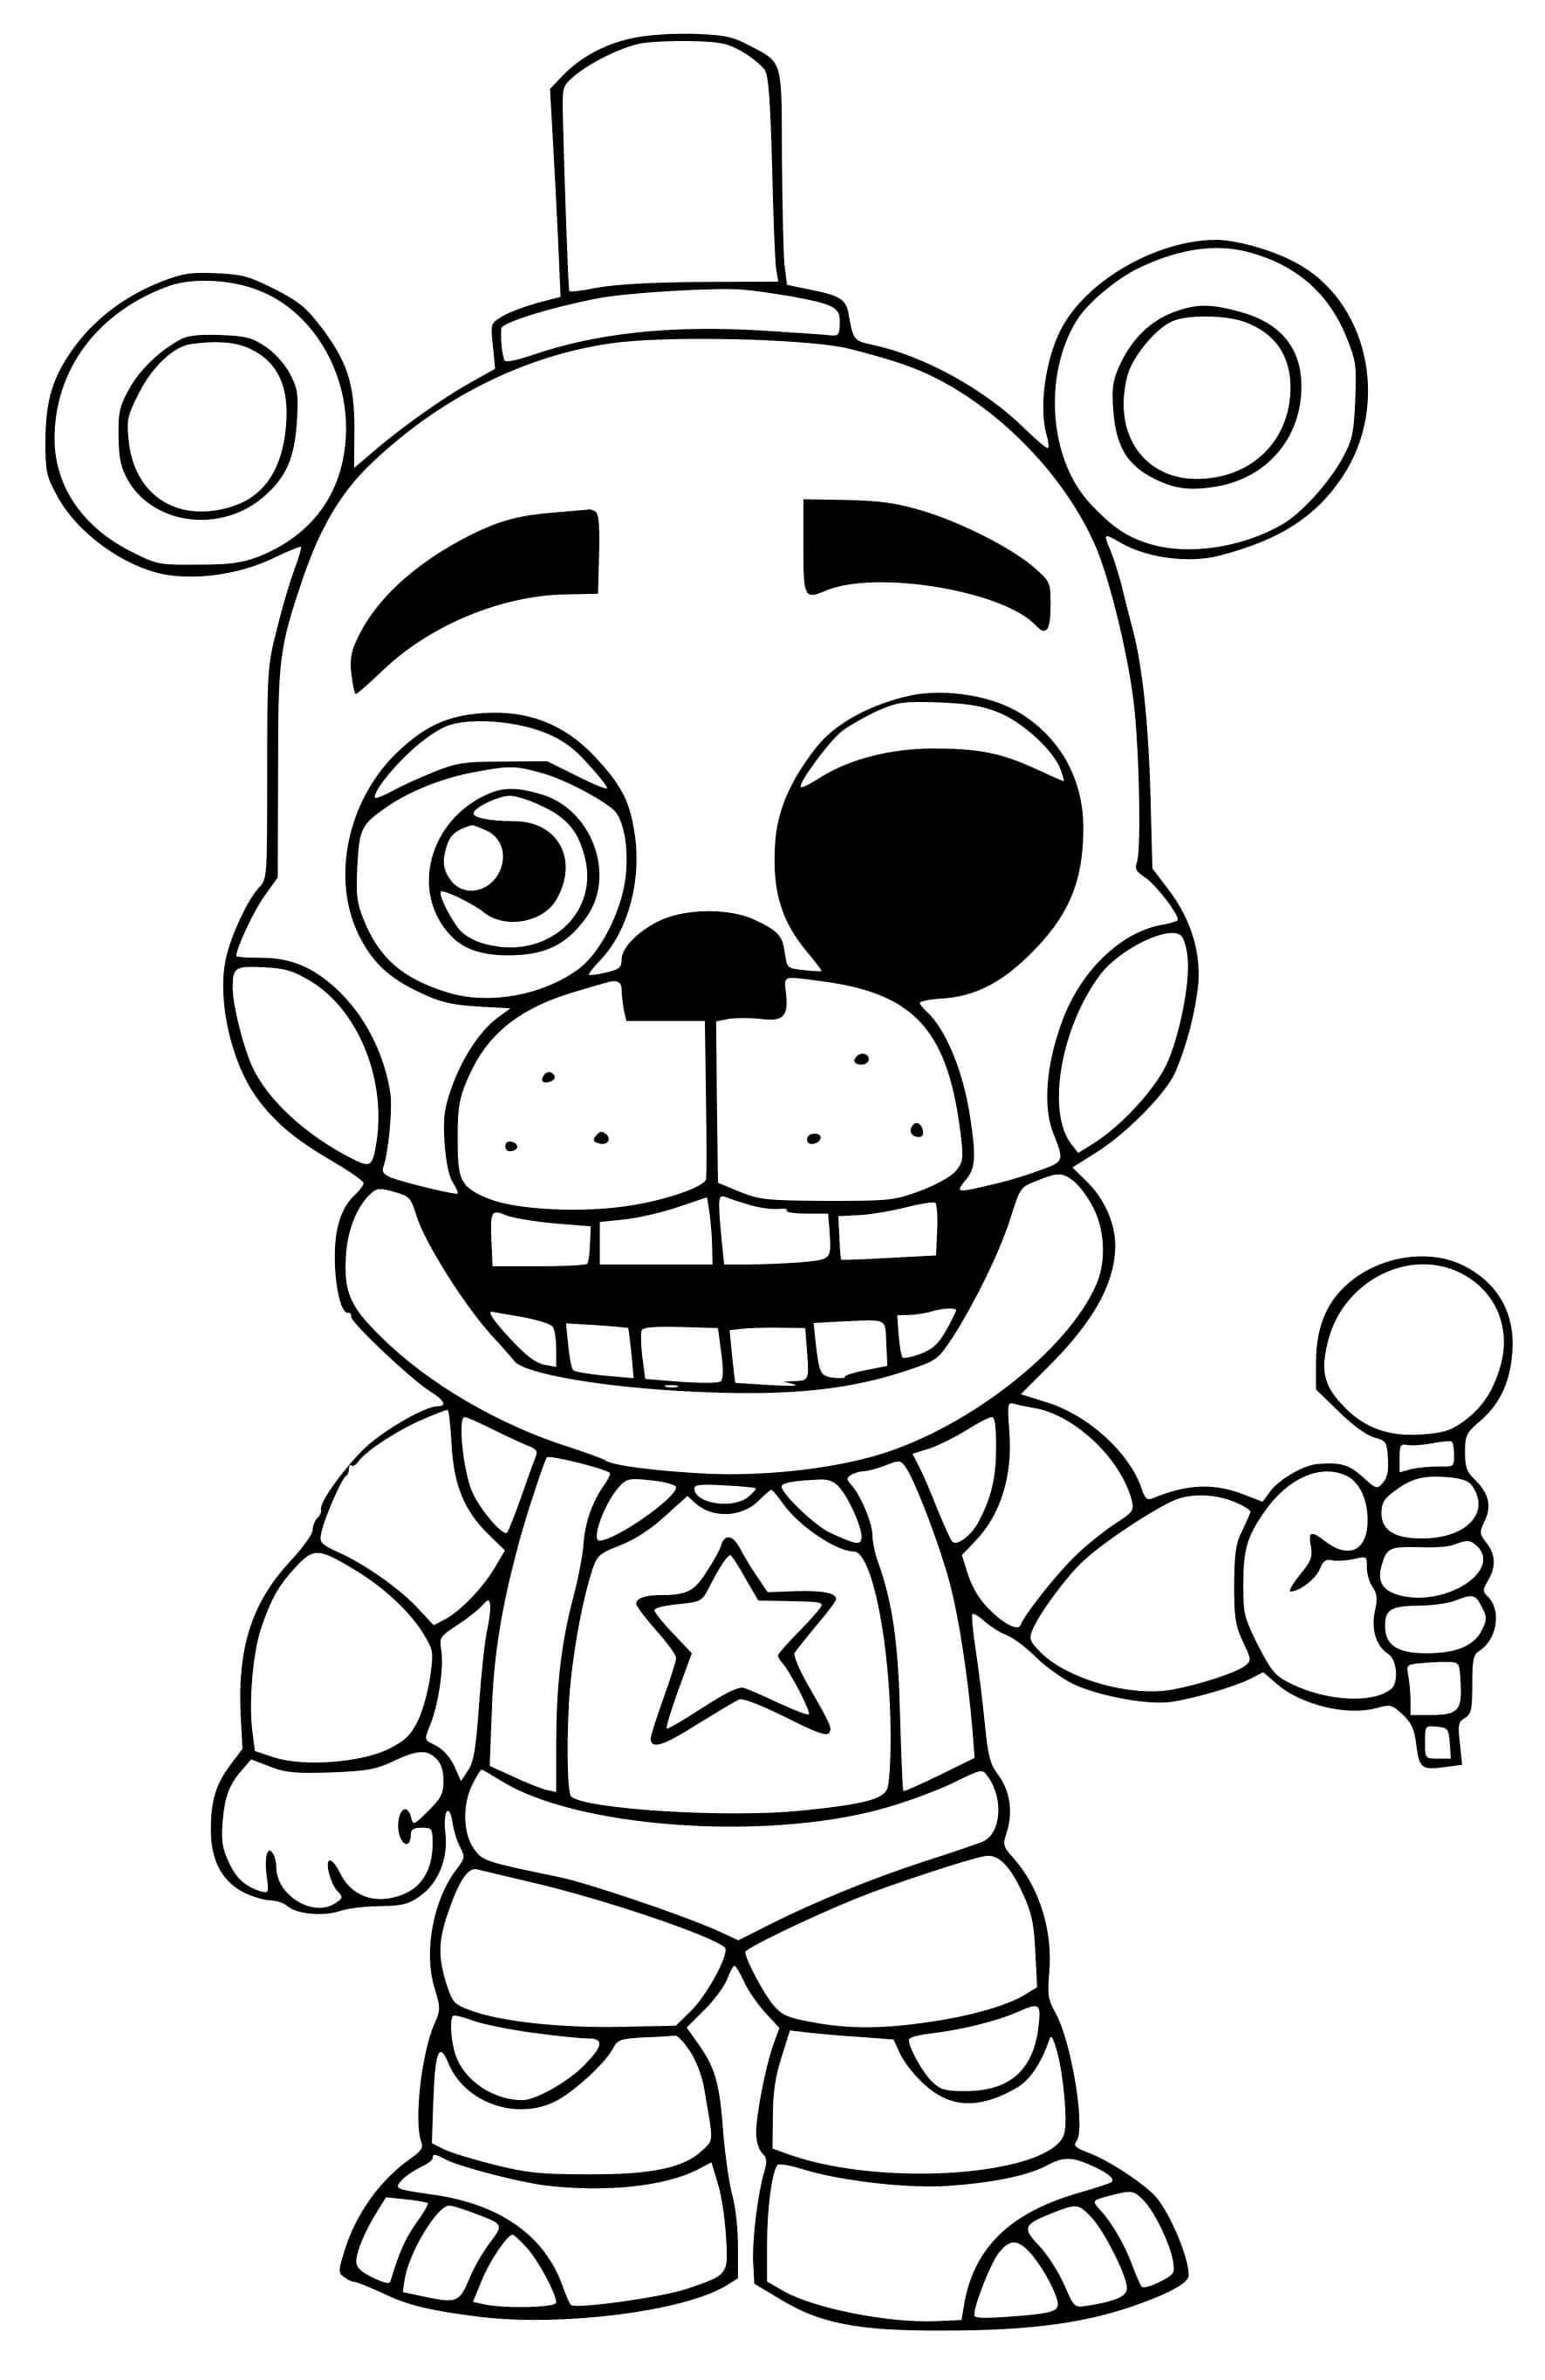 Lefty Coloring Page